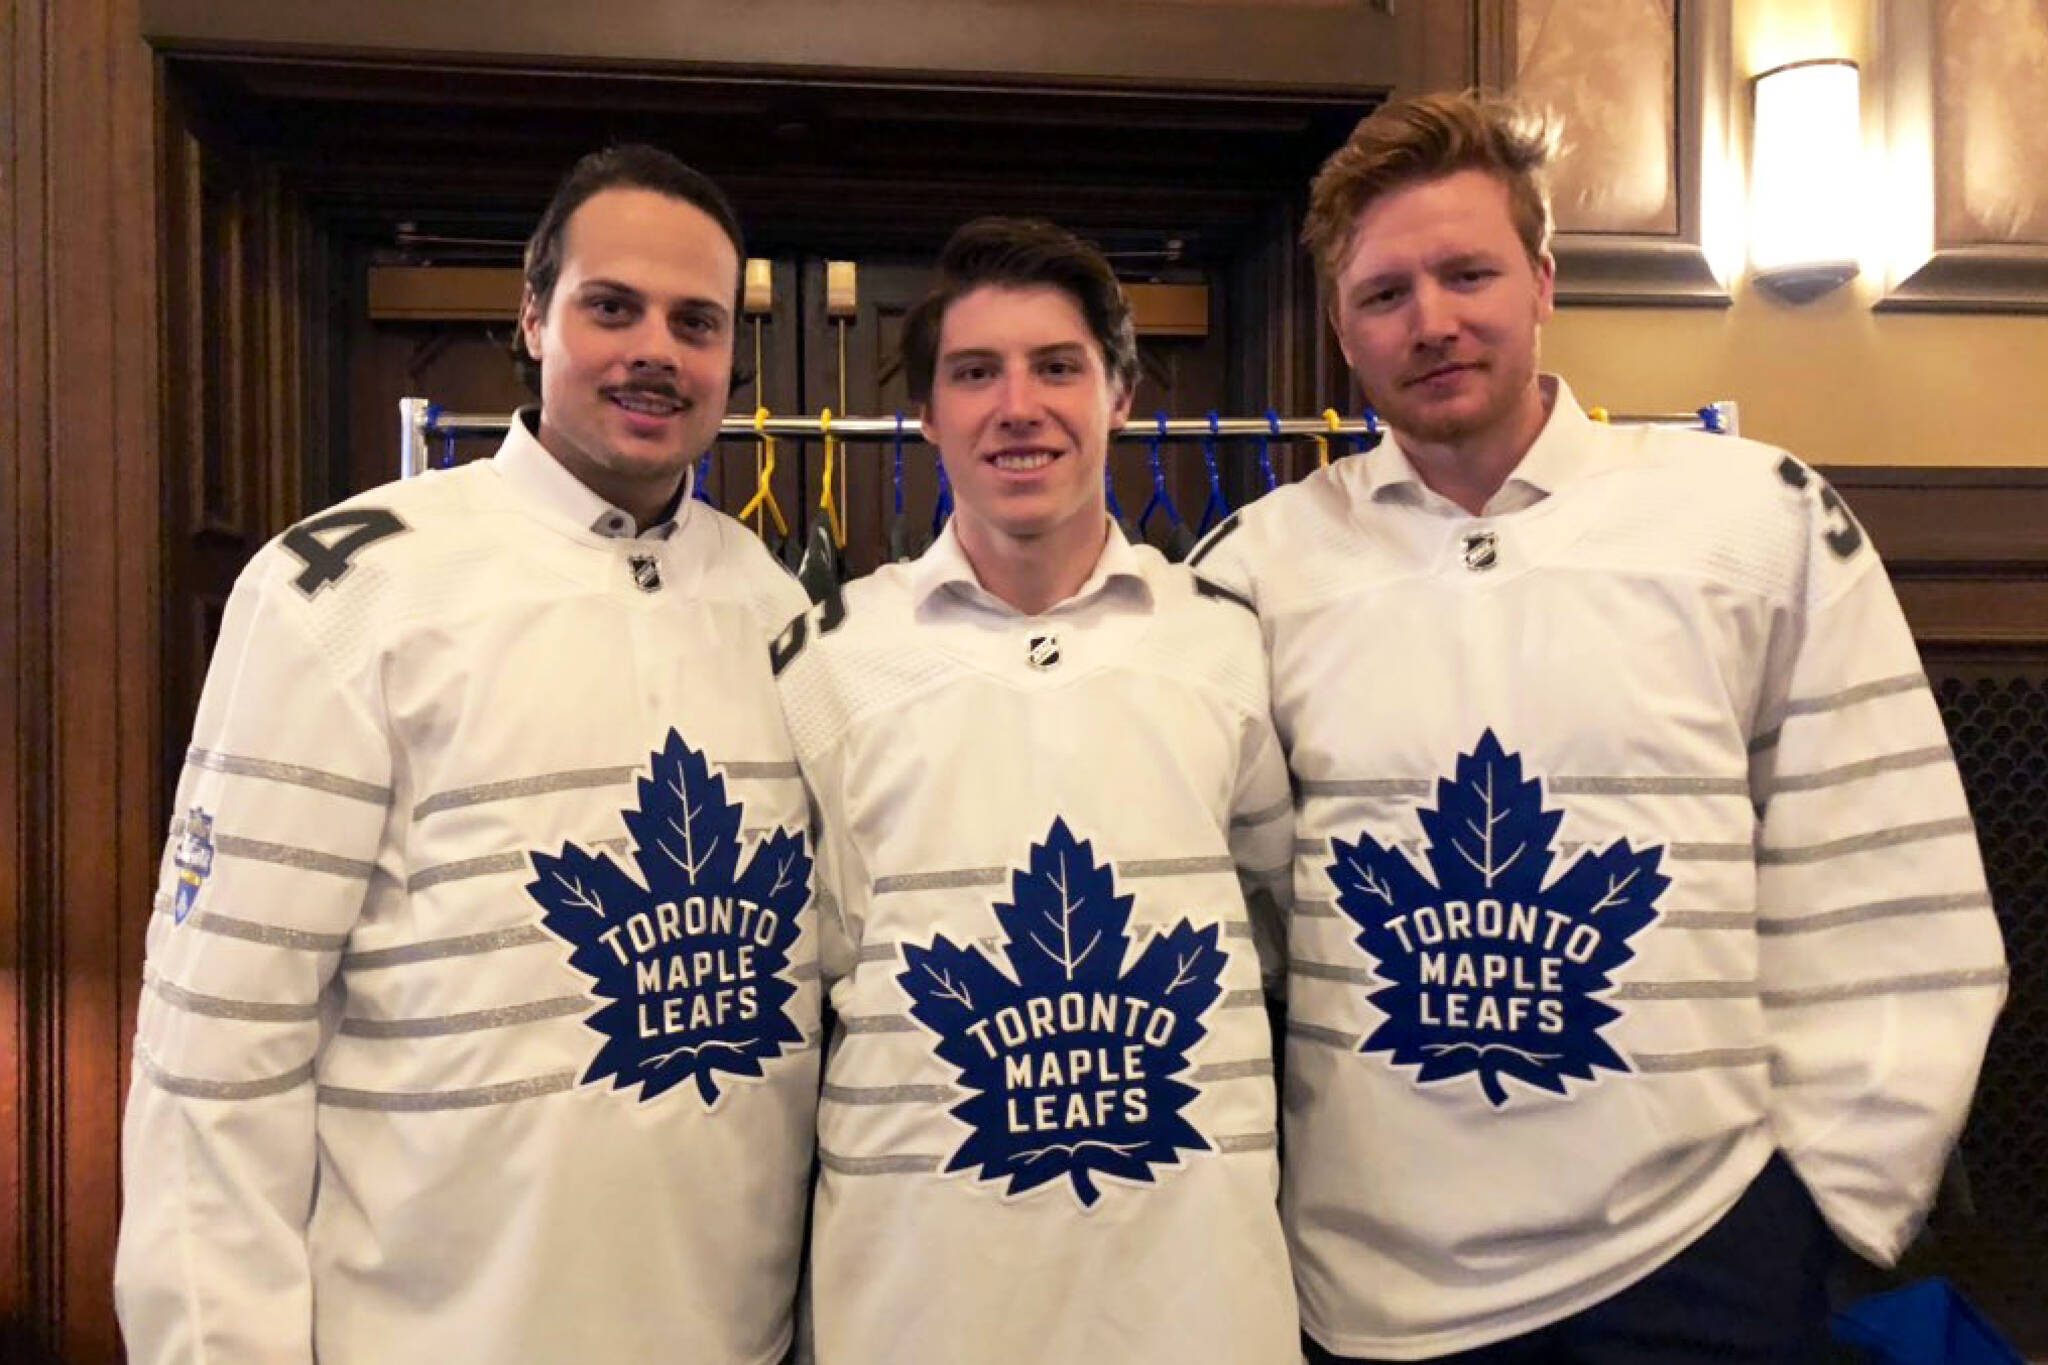 Toronto Maple Leafs: Twitter reacts to the Toronto Arenas Jersey